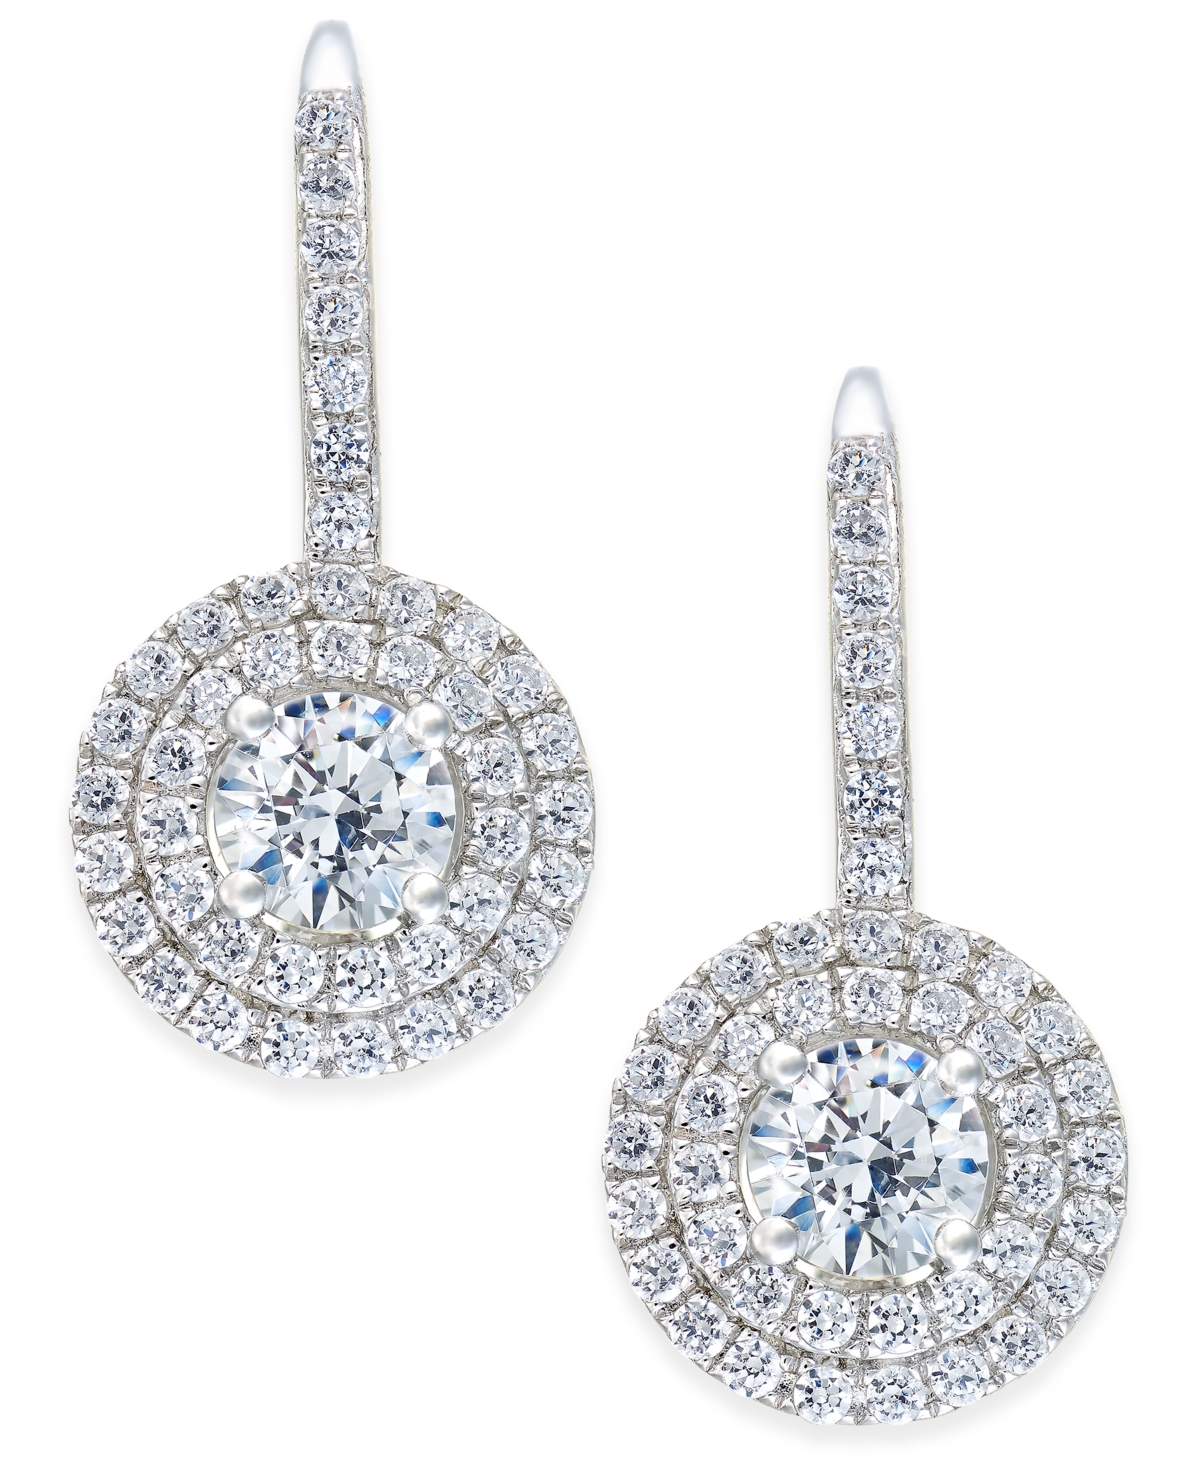 Cubic Zirconia Circle Cluster Drop Earrings in Sterling Silver, Created for Macy's - Sterling Silver